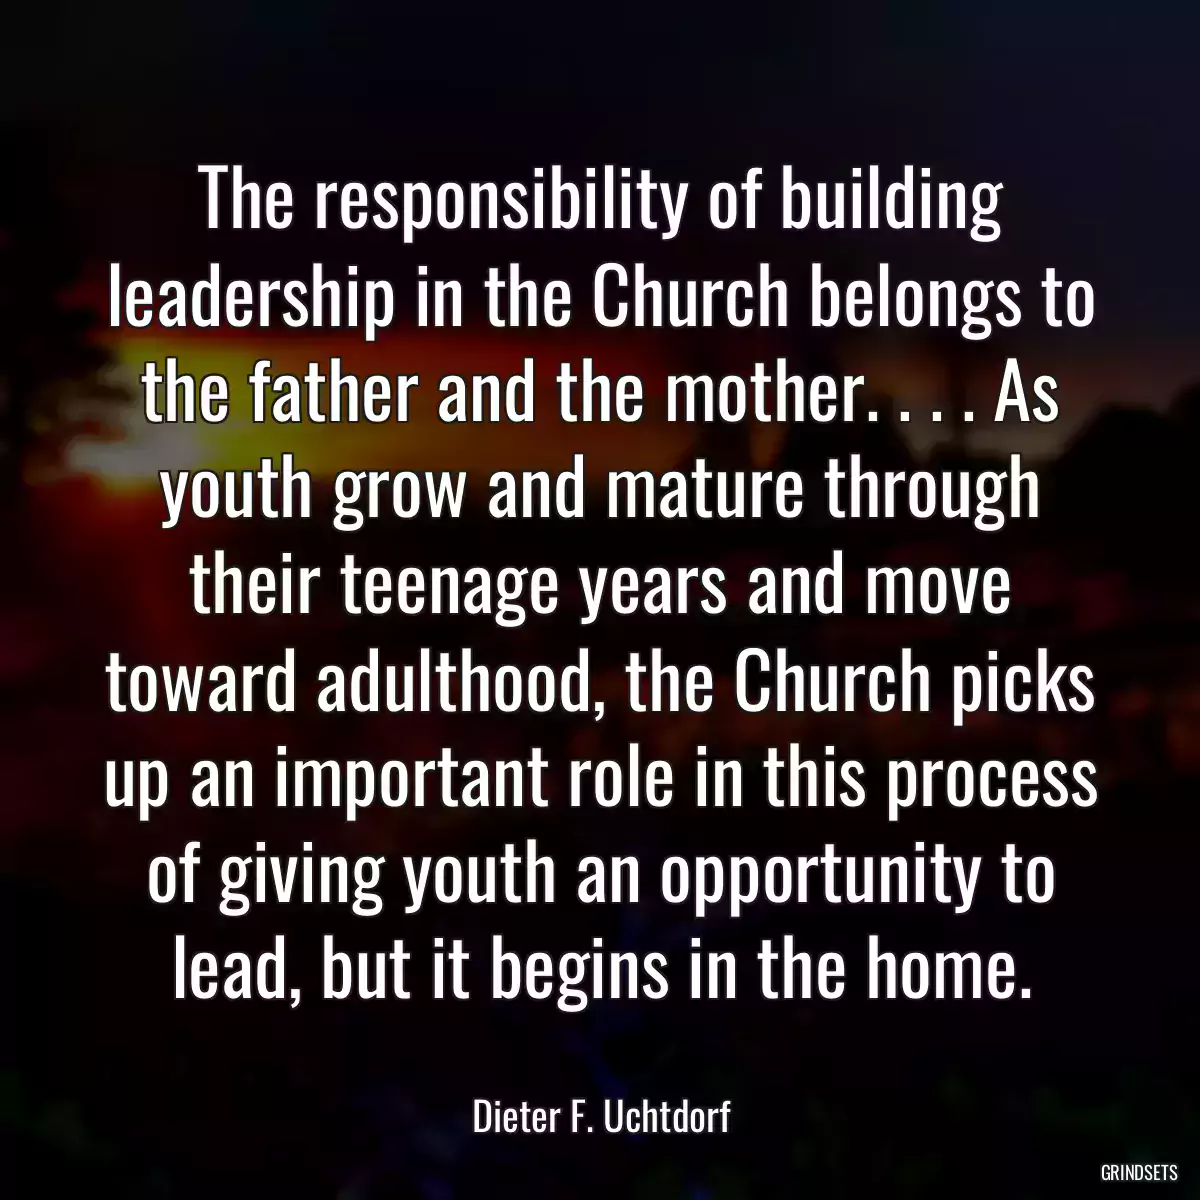 The responsibility of building leadership in the Church belongs to the father and the mother. . . . As youth grow and mature through their teenage years and move toward adulthood, the Church picks up an important role in this process of giving youth an opportunity to lead, but it begins in the home.